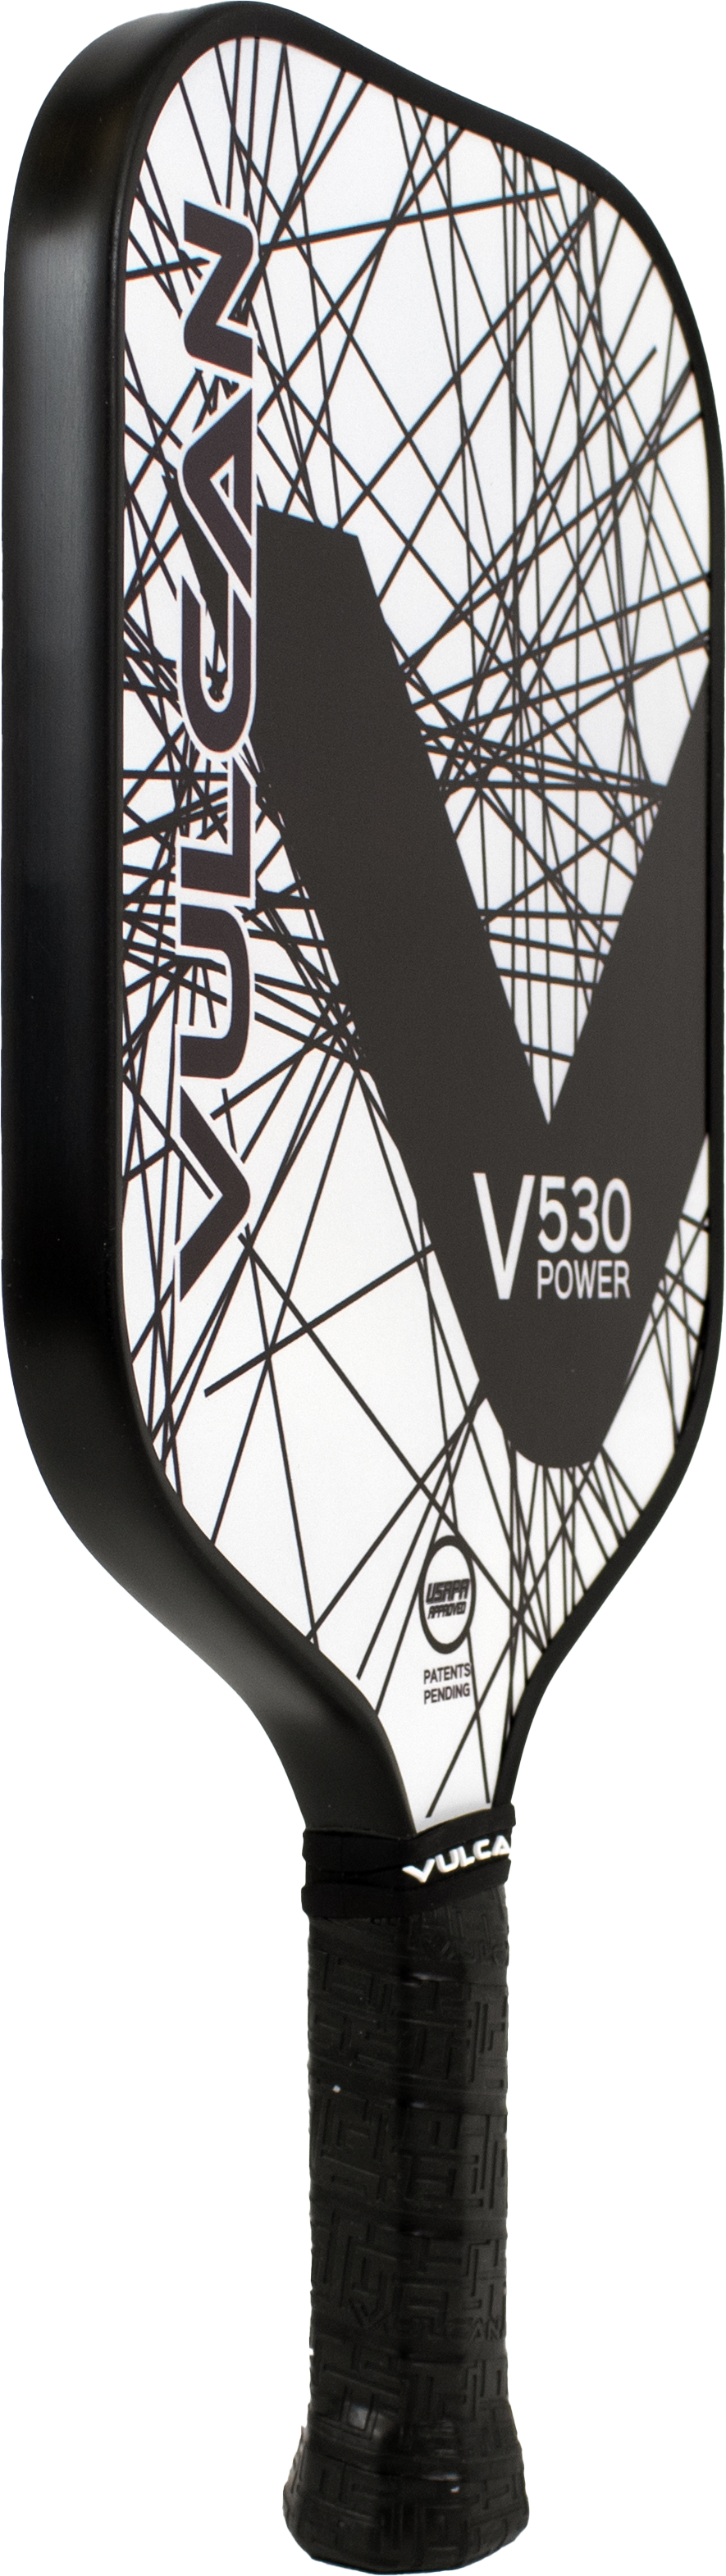 The Vulcan V350 is shown on a white background.